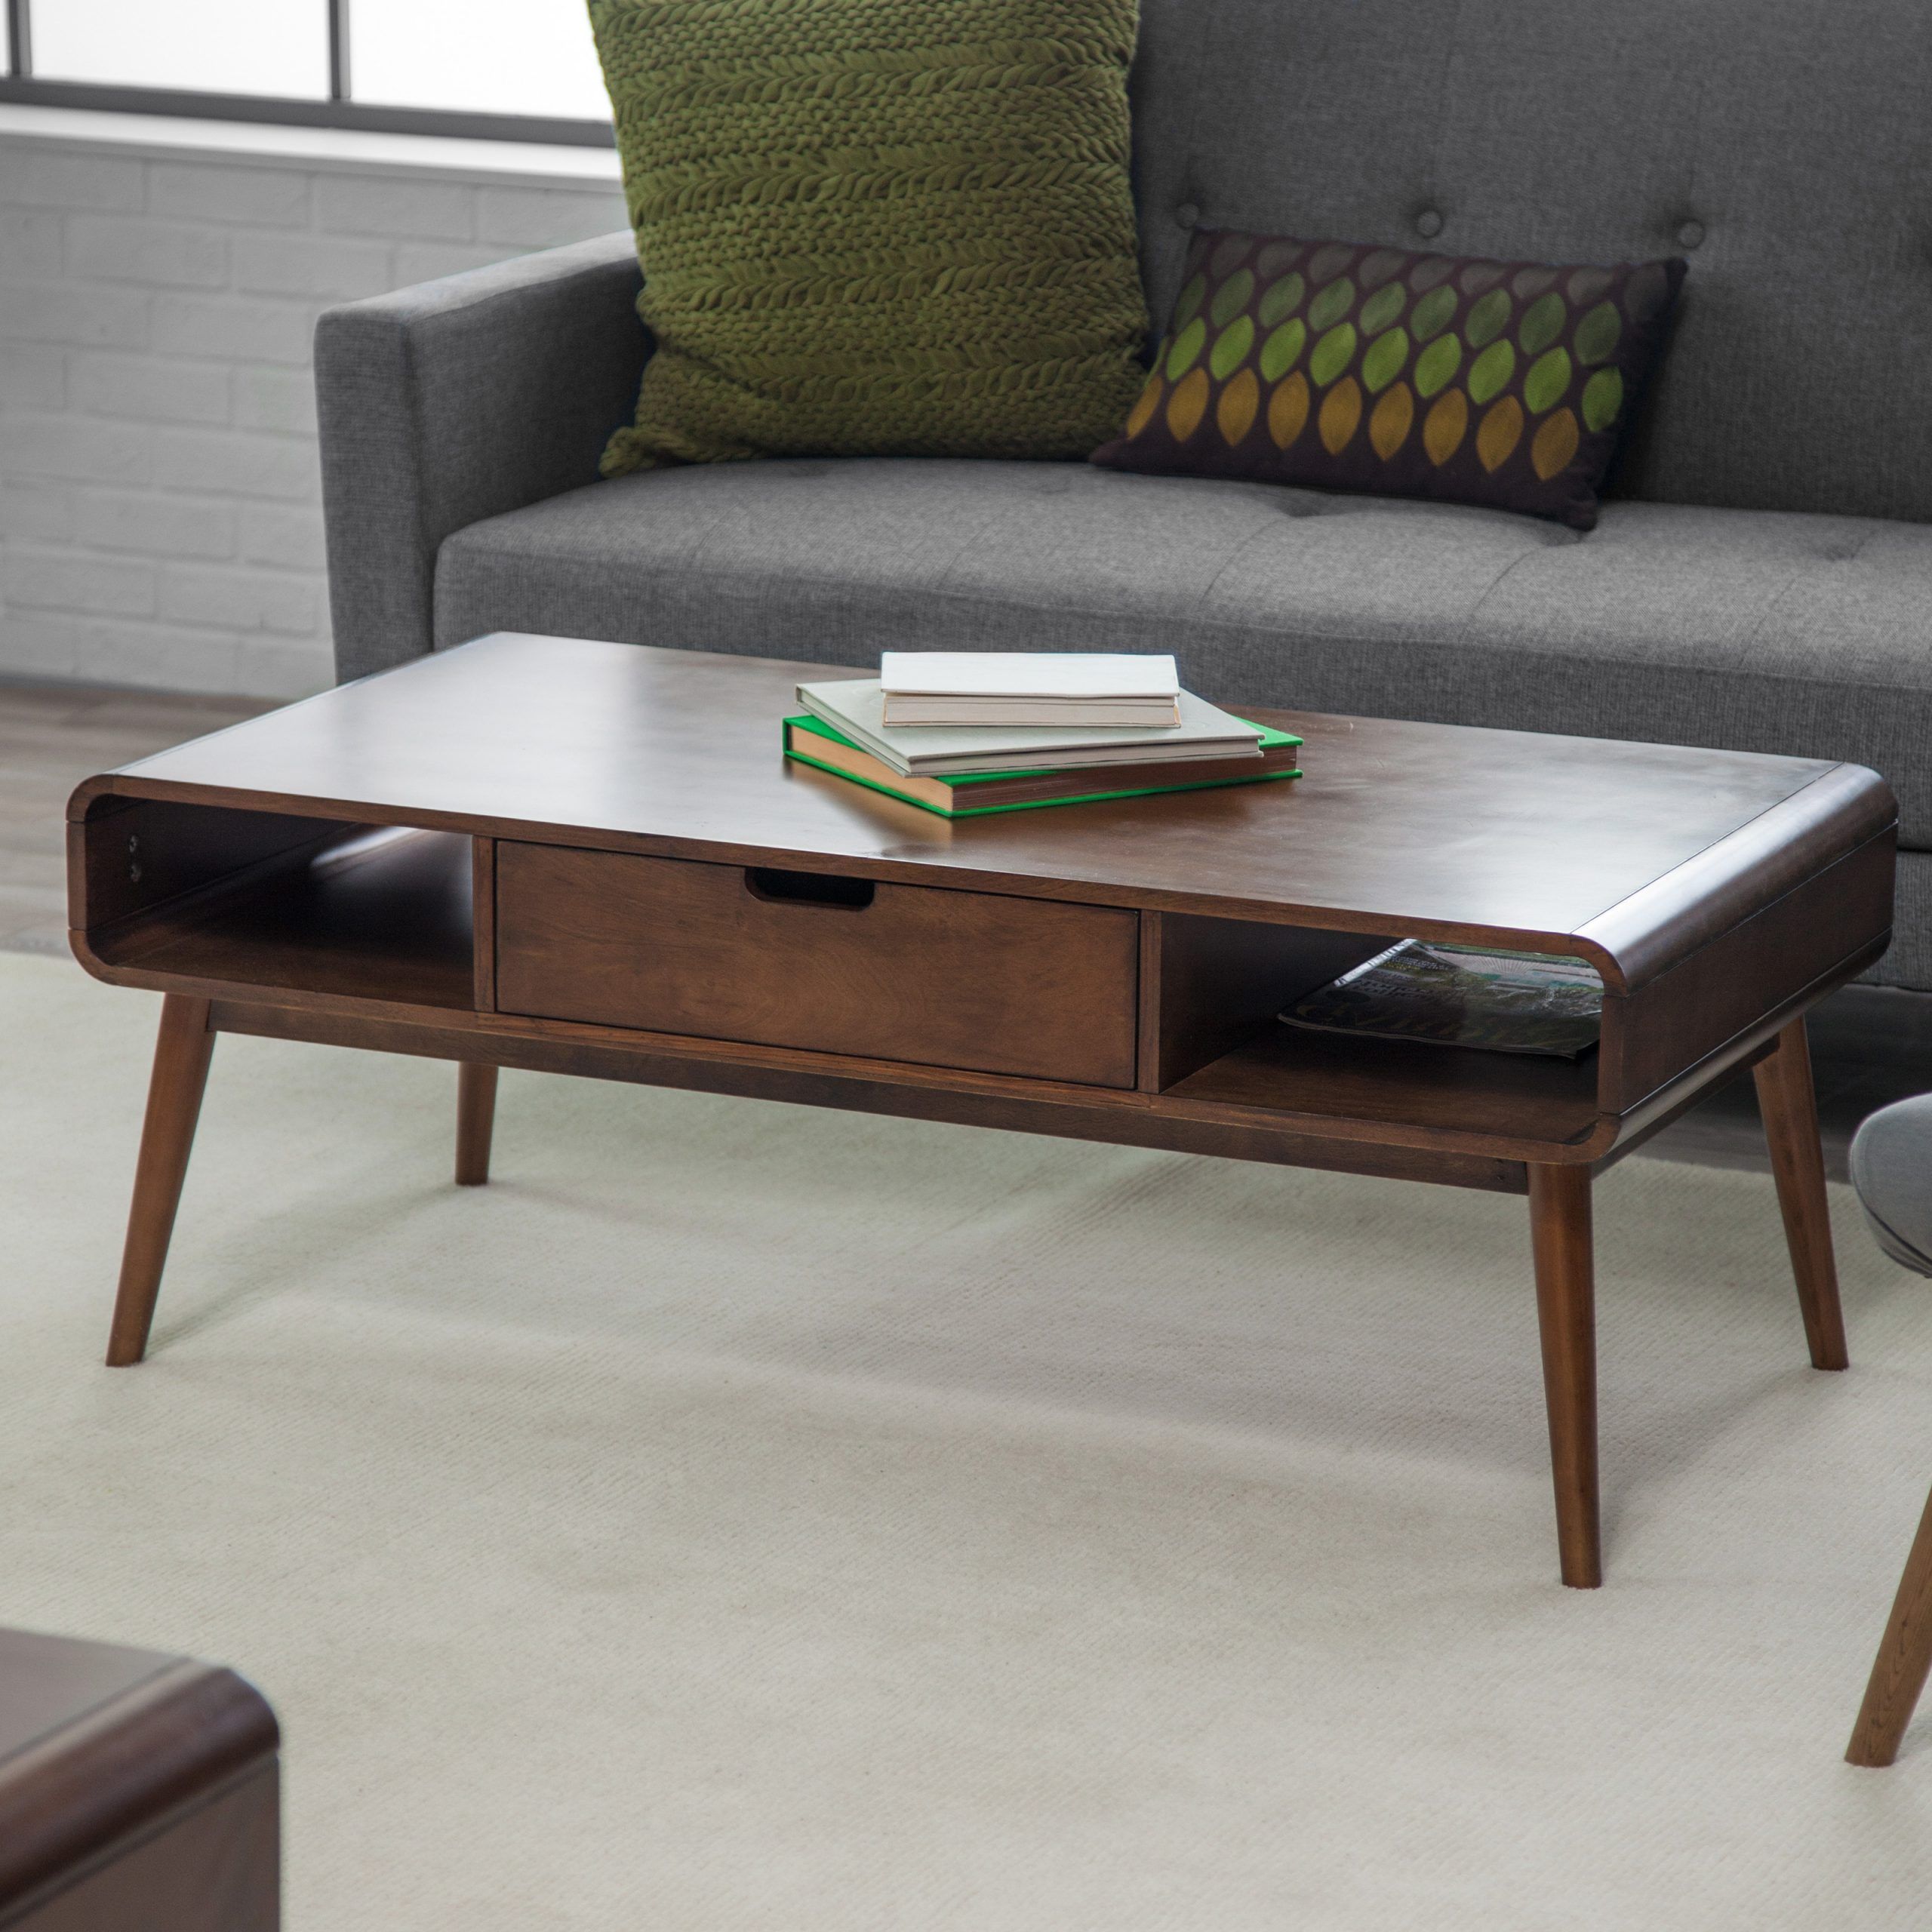 Belham Living Carter Mid Century Modern Coffee Table For Recent Geometric Glass Modern Coffee Tables (View 3 of 20)